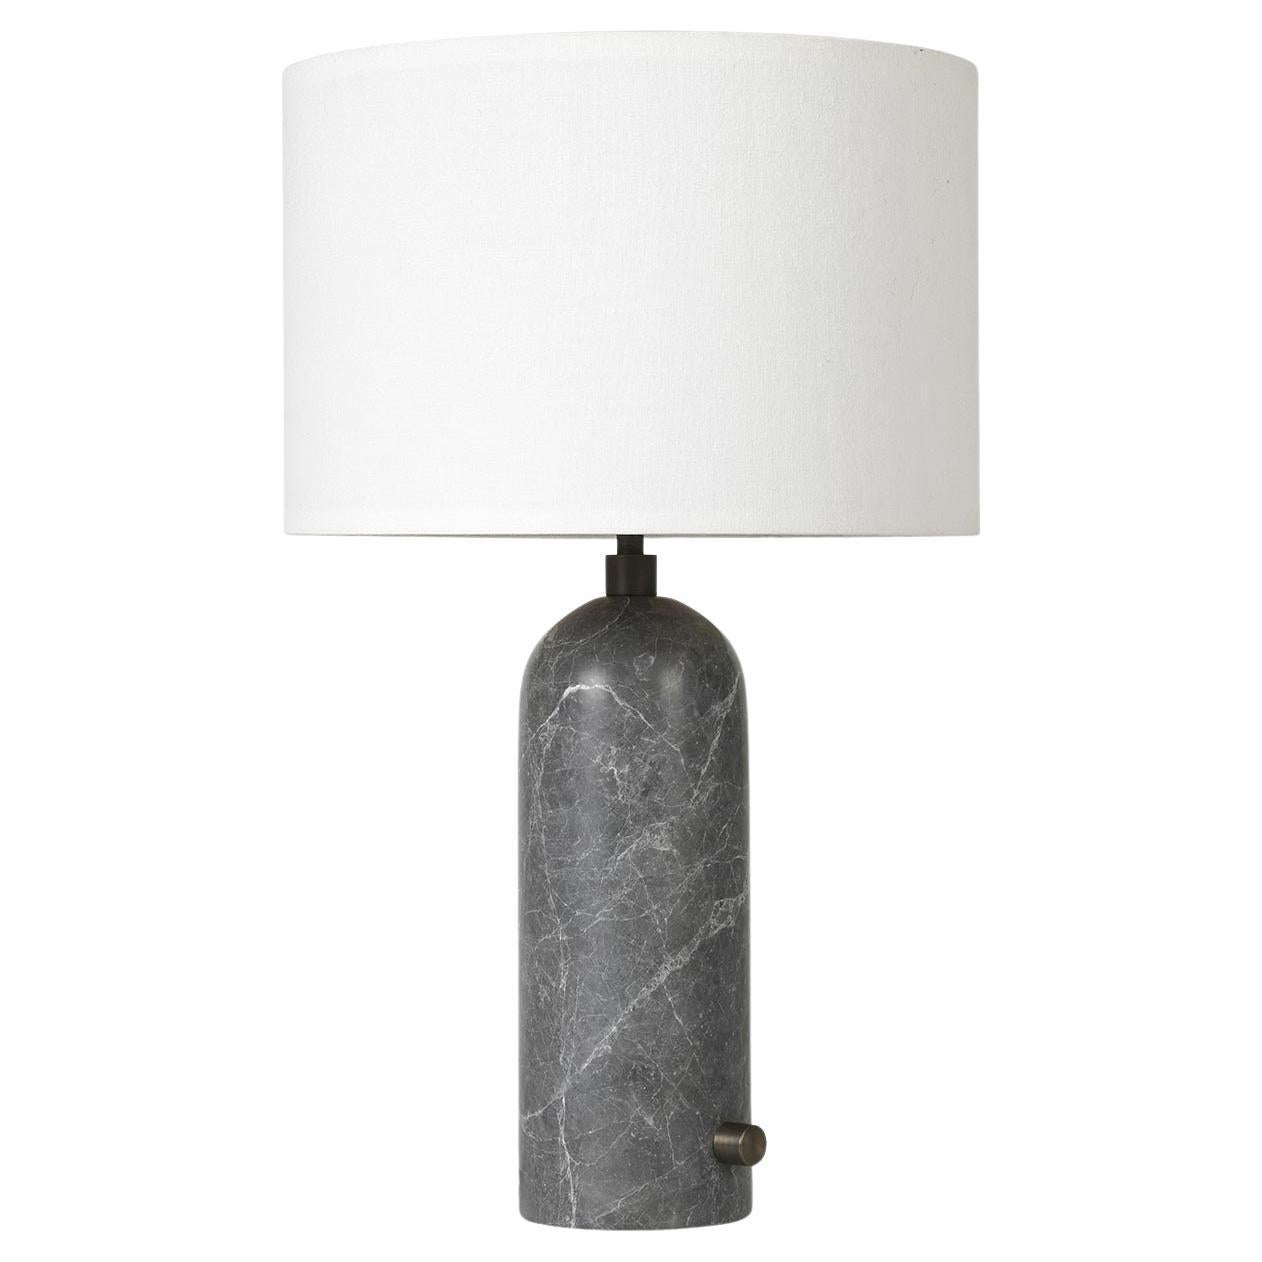 Gravity Table Lamp - Small, Grey Marble, White.